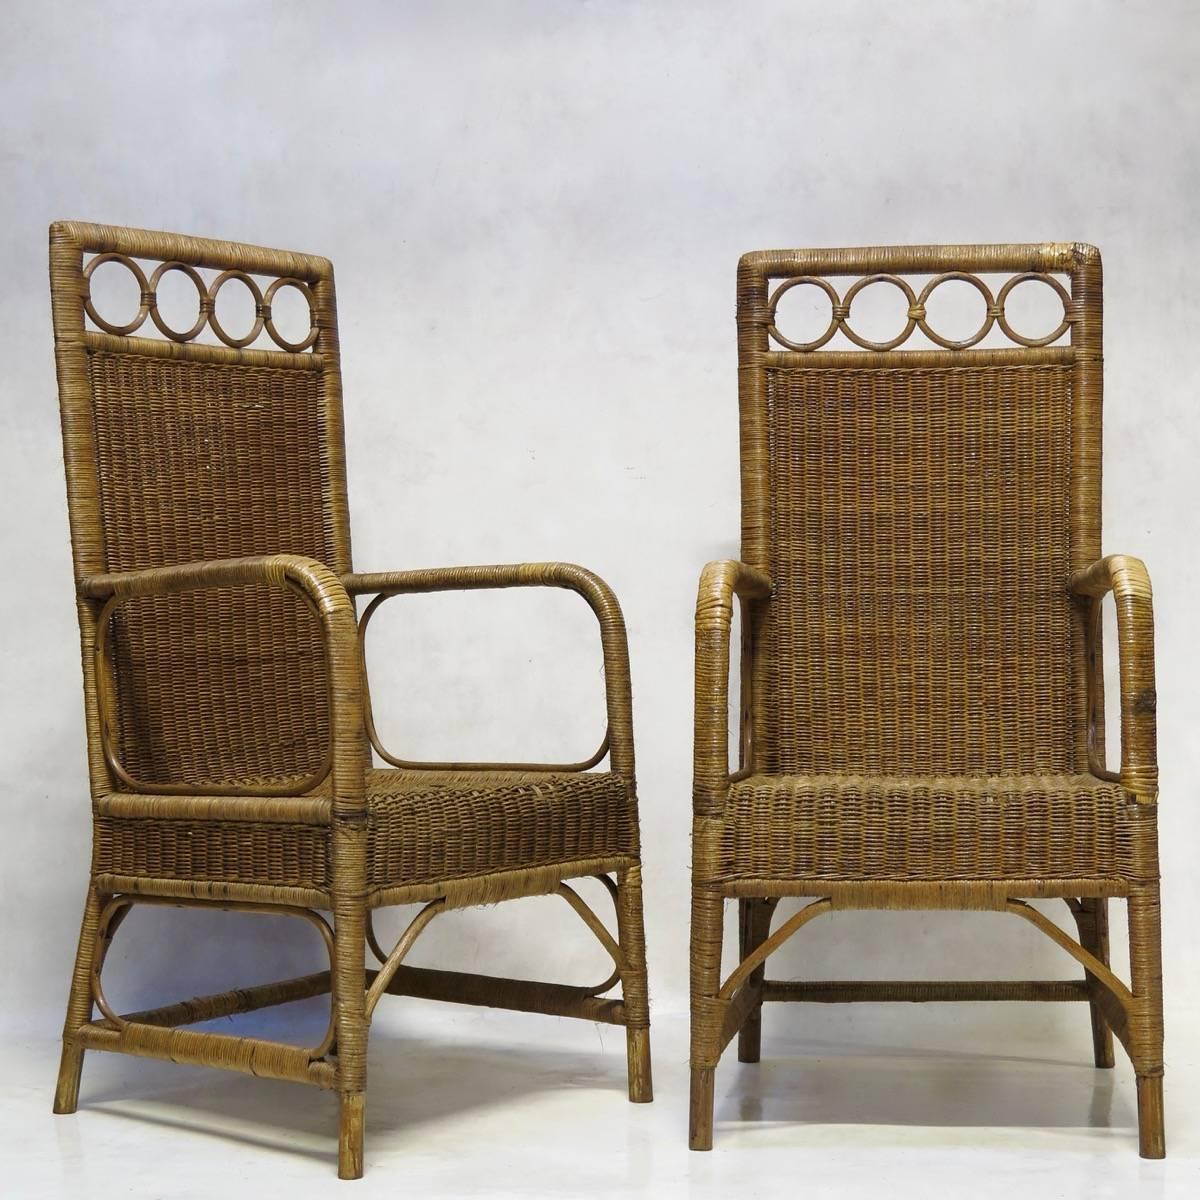 Arts & Crafts style wickerwork set, comprising a settee, two armchairs, two chairs, a table and a pedestal.

The dimensions provided below are for the settee. The other pieces measure:

Armchairs:
Height: 115cm - 45.27in
Width: 55cm - 21.65in
Depth: